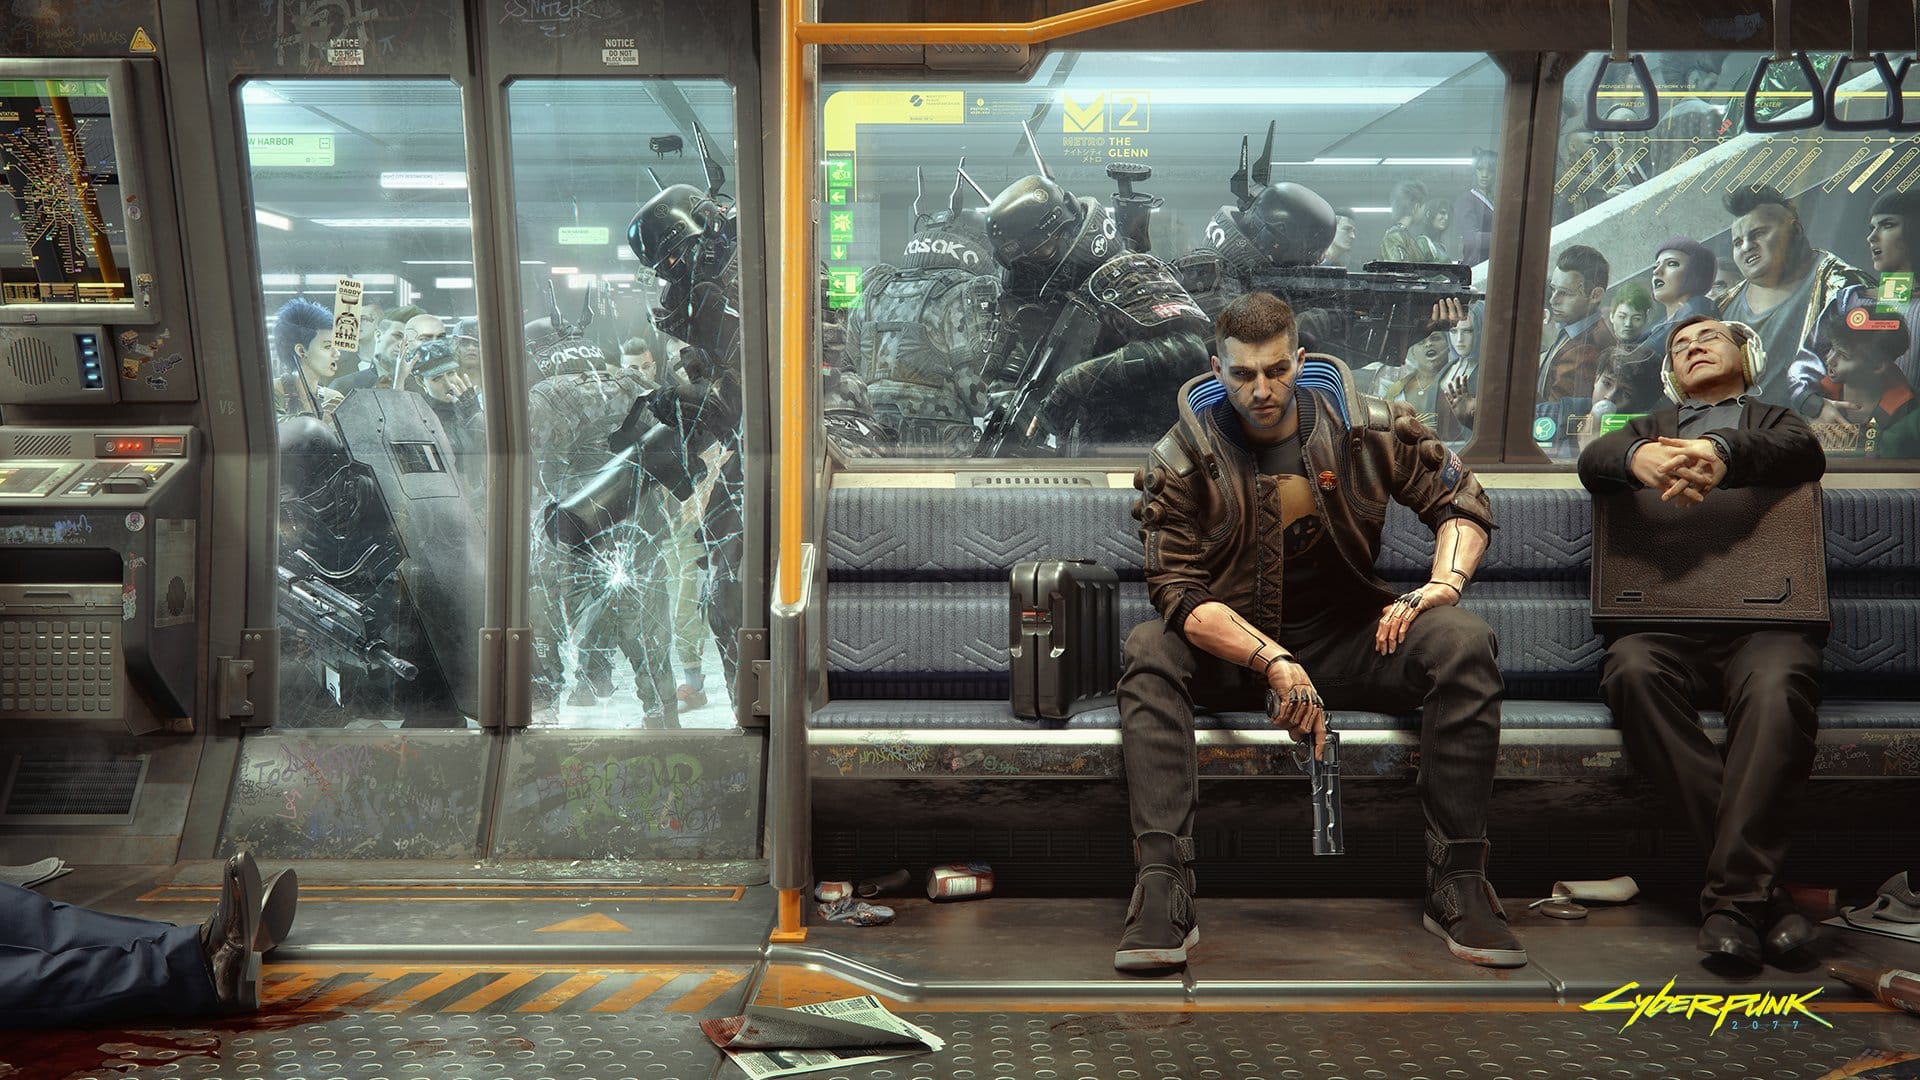 New Cyberpunk 2077 Wallpaper Shows How Metro Commuting Works